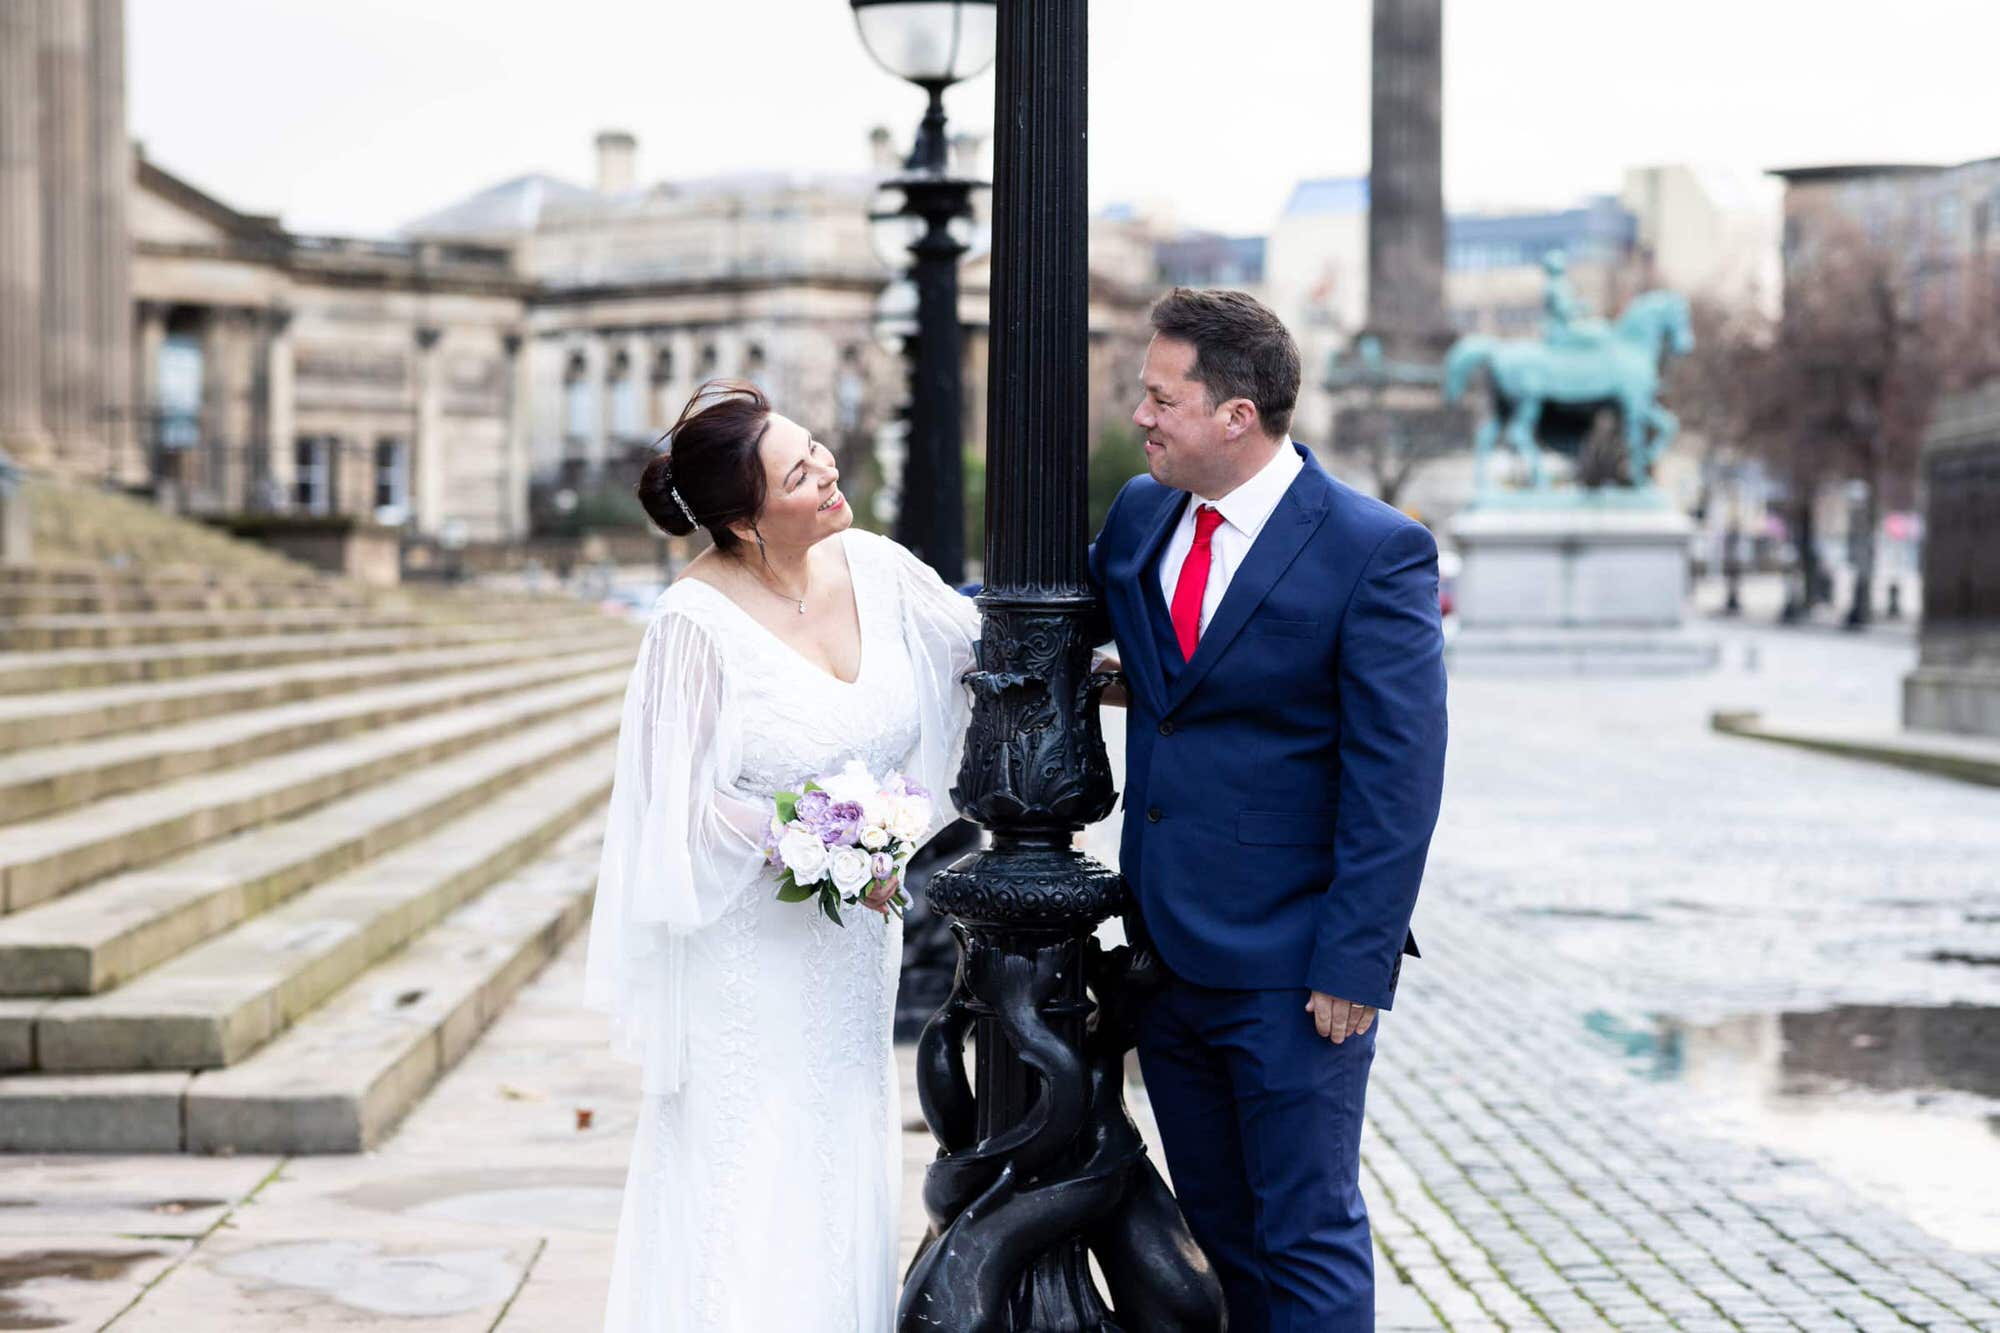 Groom and Bride at their St Georges Hall Liverpool micro wedding by kent small wedding photographer